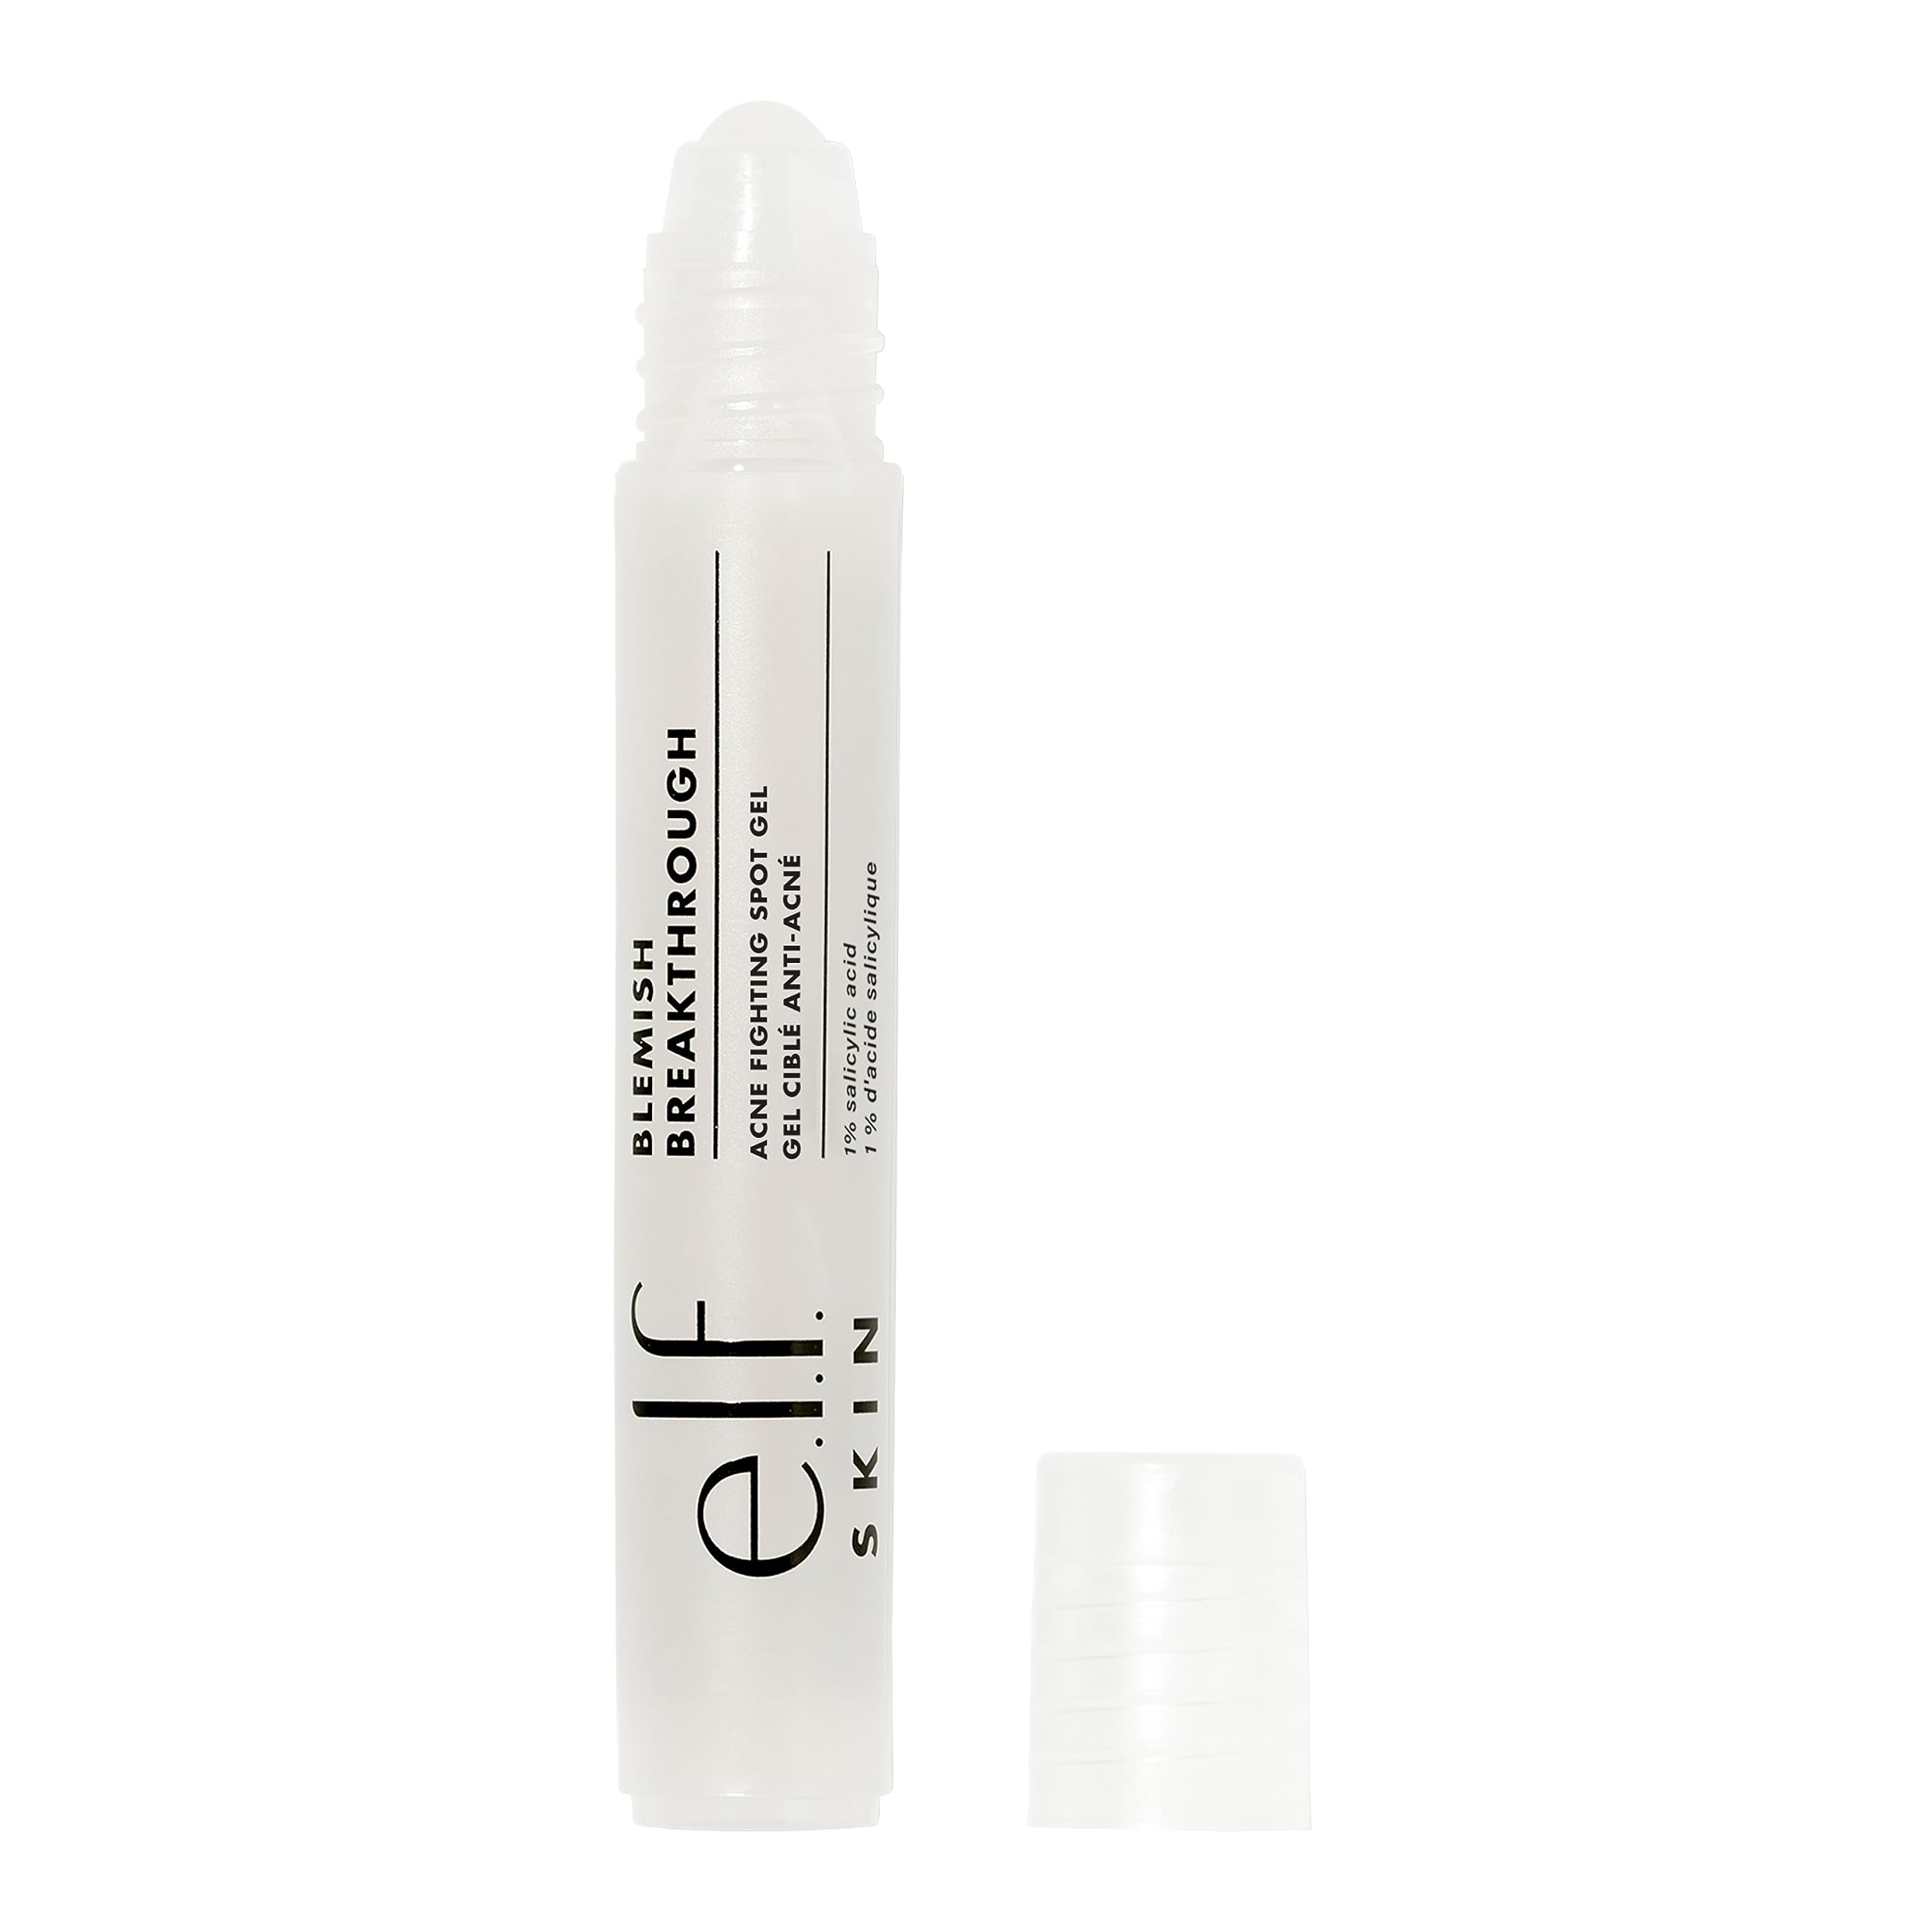 3-Count 0.25-Oz e.l.f. Cosmetics Skin Blemish Breakthrough Roll-On Acne Fighting Spot Gel w/ Salicylic Acid $6.40 ($2.13 each) w/ S&S + Free Shipping w/ Prime or on $35+